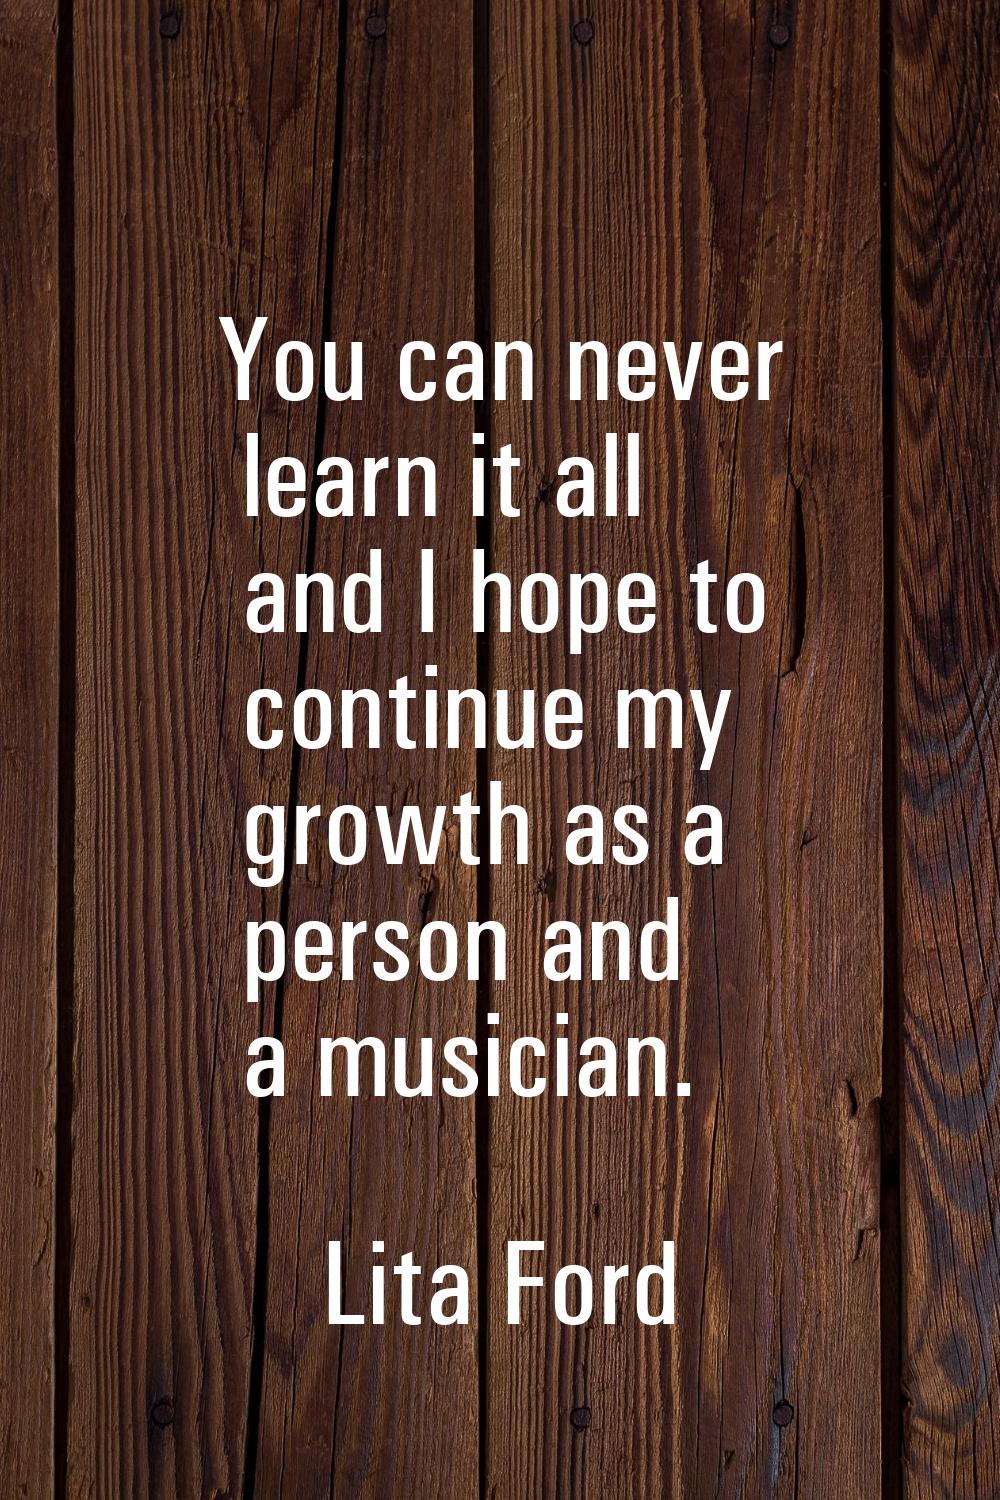 You can never learn it all and I hope to continue my growth as a person and a musician.